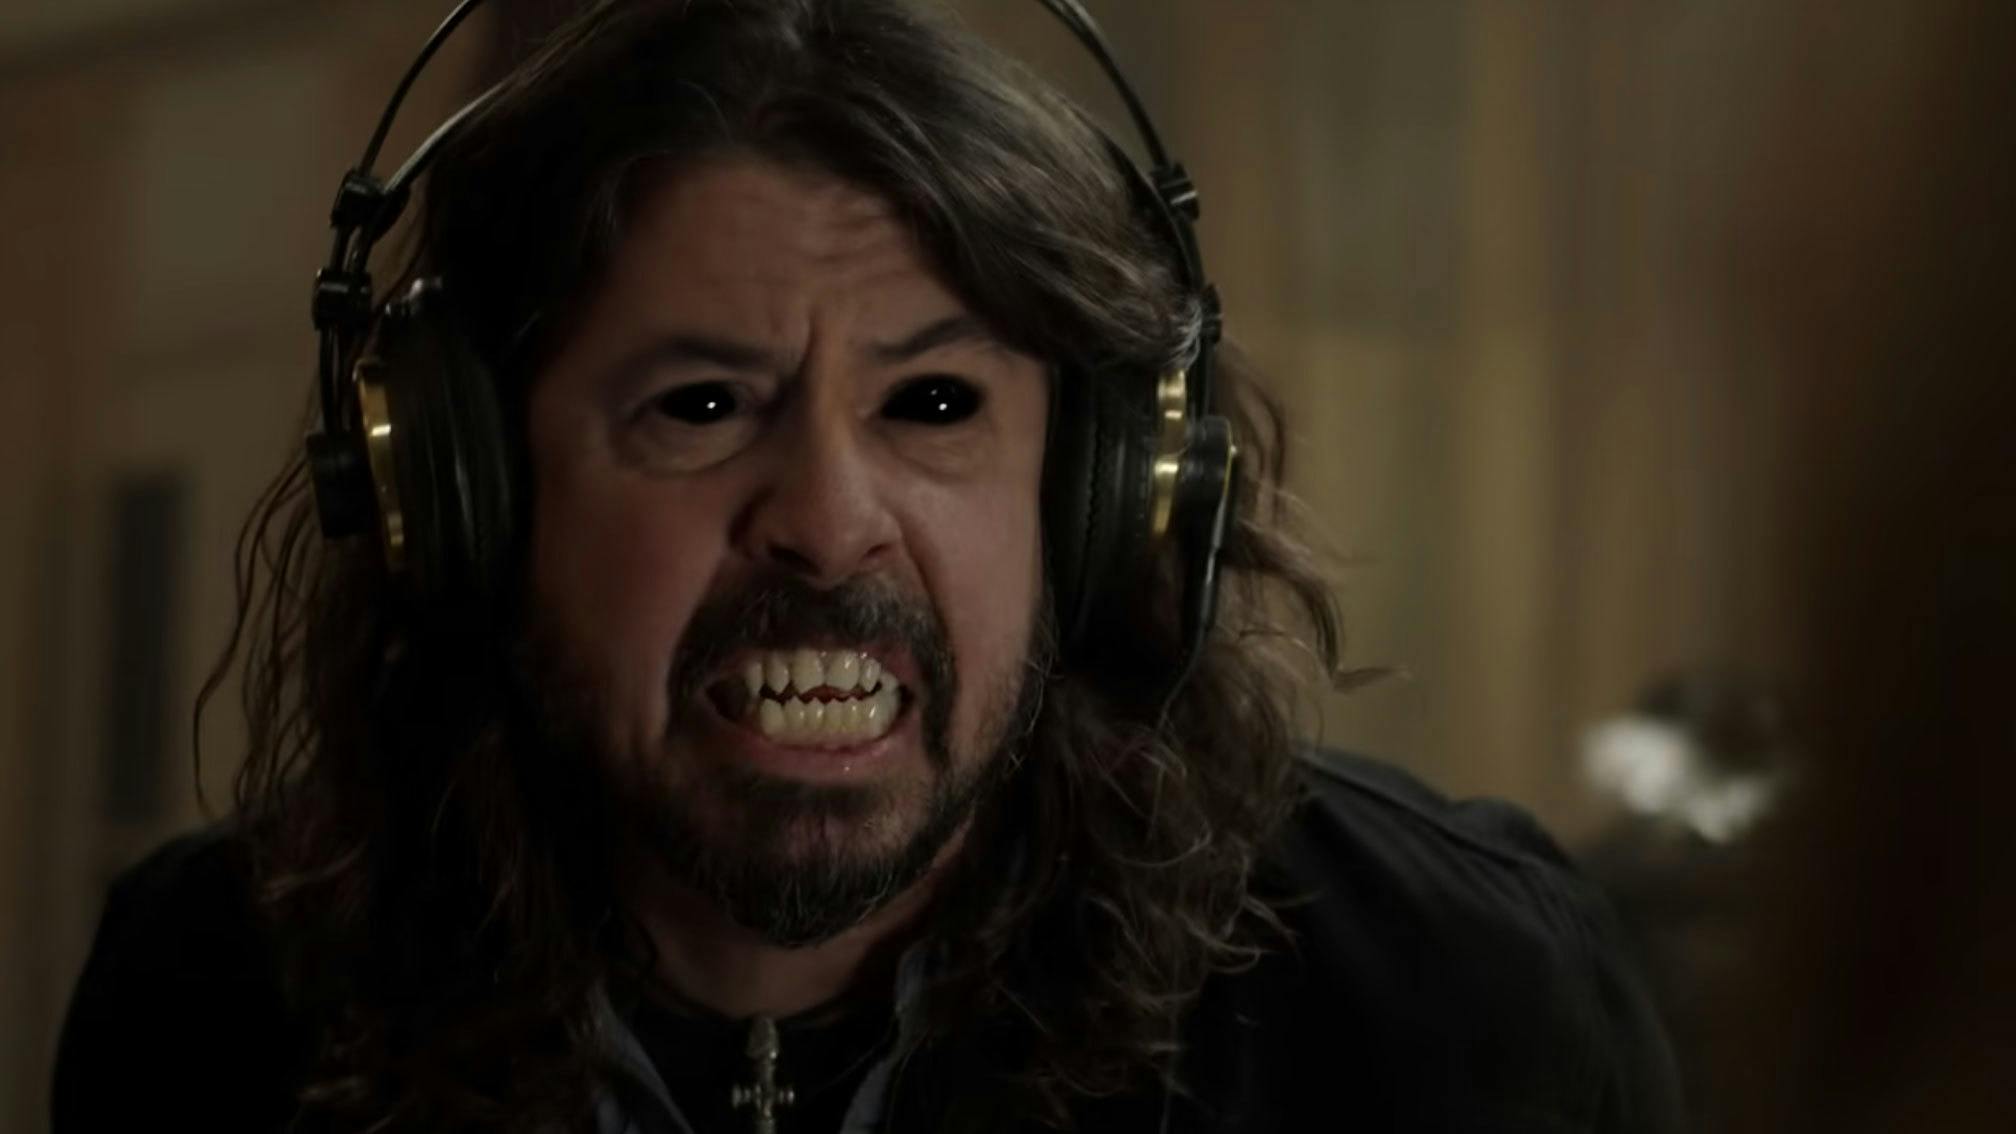 Studio 666: Dave Grohl confirms fictional thrash metal band Dream Widow’s album release date